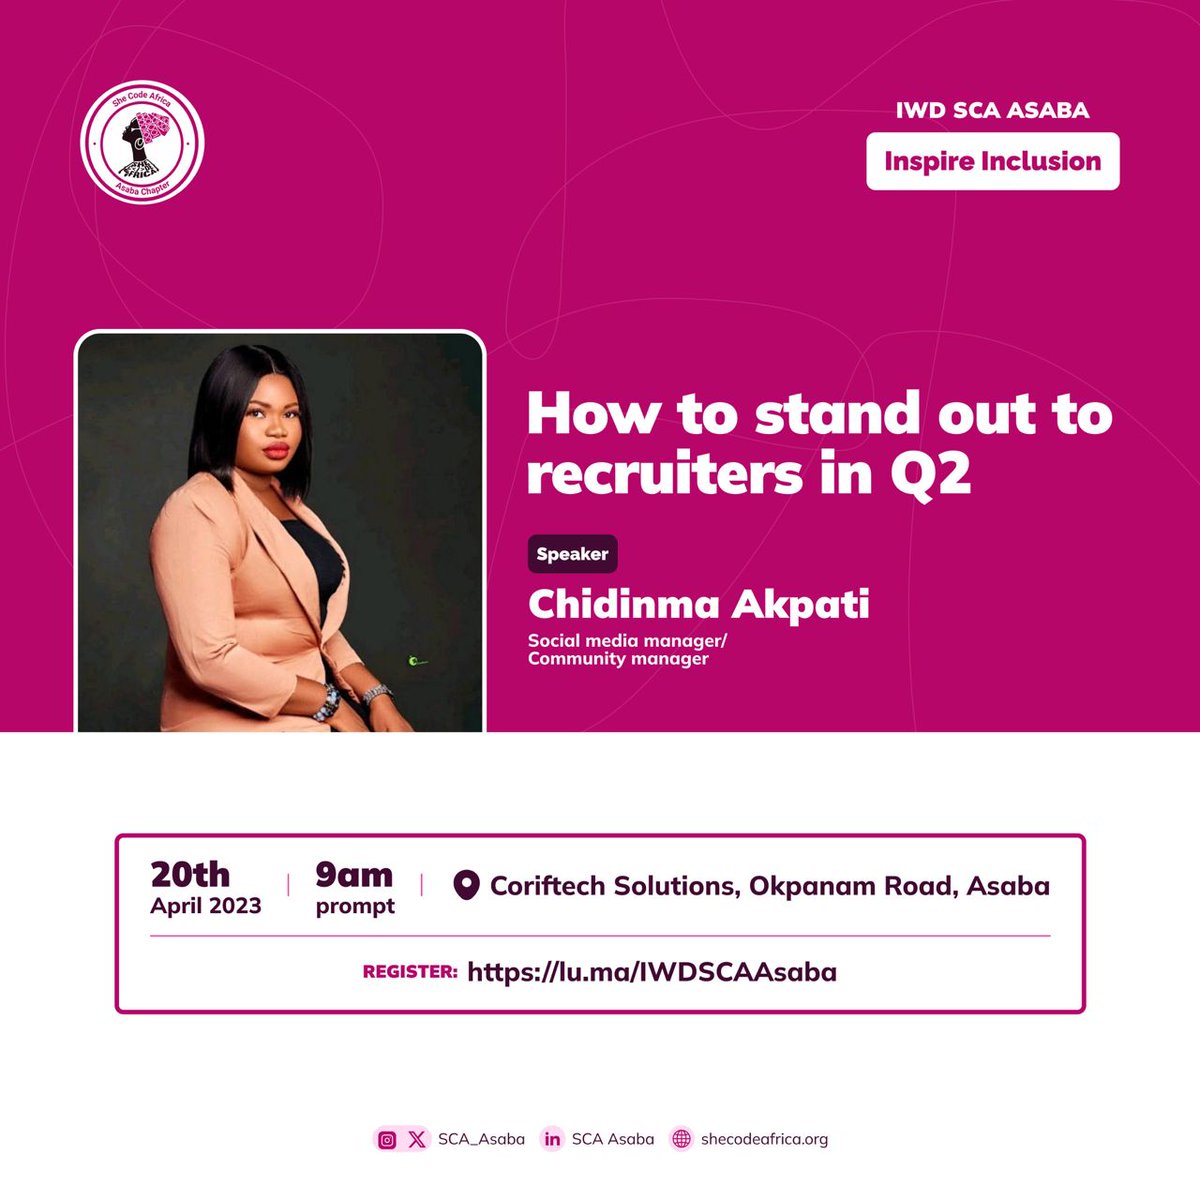 Exciting News! Meet the powerhouse speakers for our upcoming Women's Day Event!🌟

@akpati_chidinma @primfenny and Cynthia Orife

Join us to hear their incredible stories and insights. 
🗓️April 20th - 9am📍lu.ma/IWDSCAAsaba

#WomenInTech @SheCodeAfrica #SCA #SCAAsaba